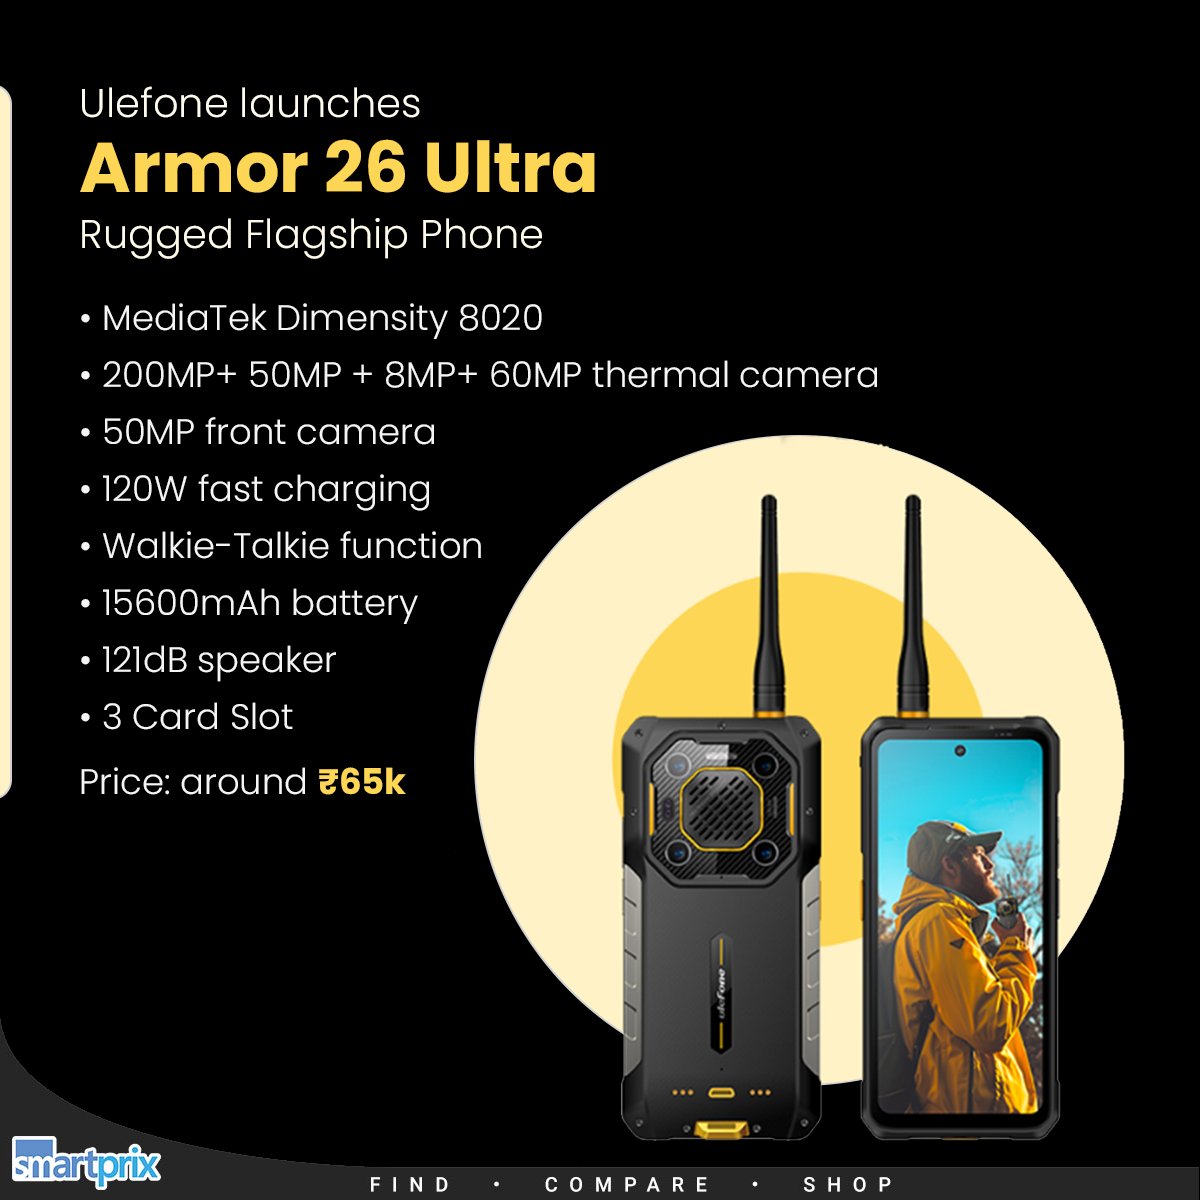 This rugged phone comes with a 15,600mAh battery, Walkie Talkie, 5G, and 200MP camera #UlefoneArmor26Ultra #Rugged #RuggedPhone